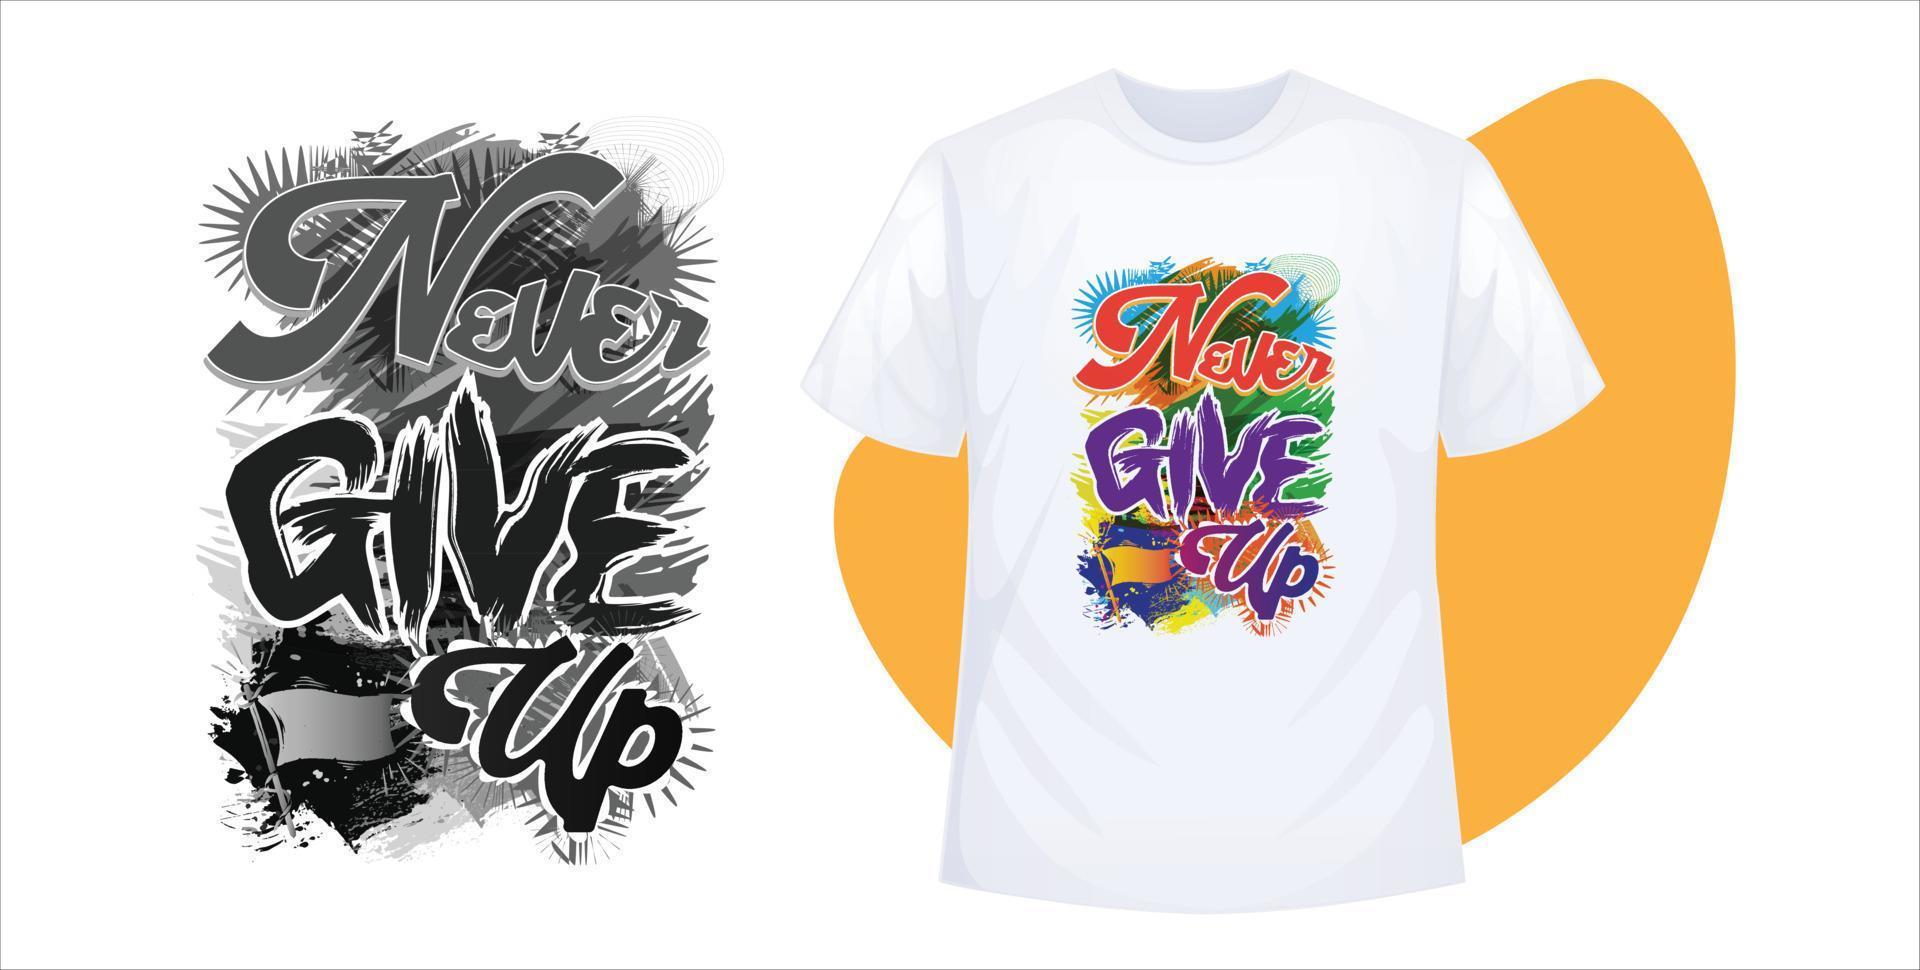 Naver Give Up tshirt graphic design Free Vector